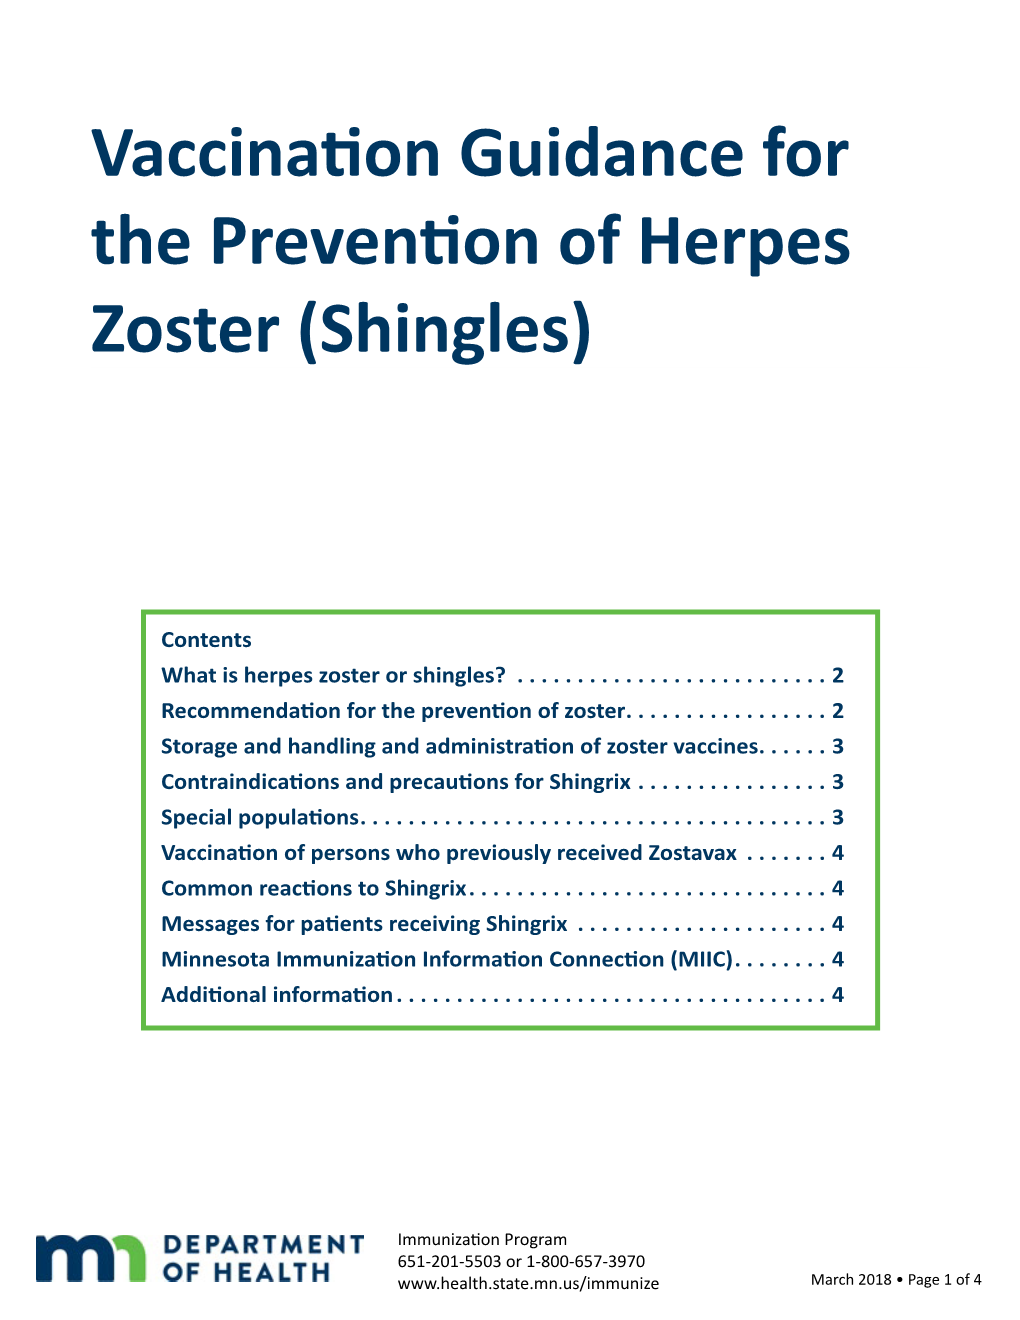 Vaccination Guidance for the Prevention of Herpes Zoster (Shingles)